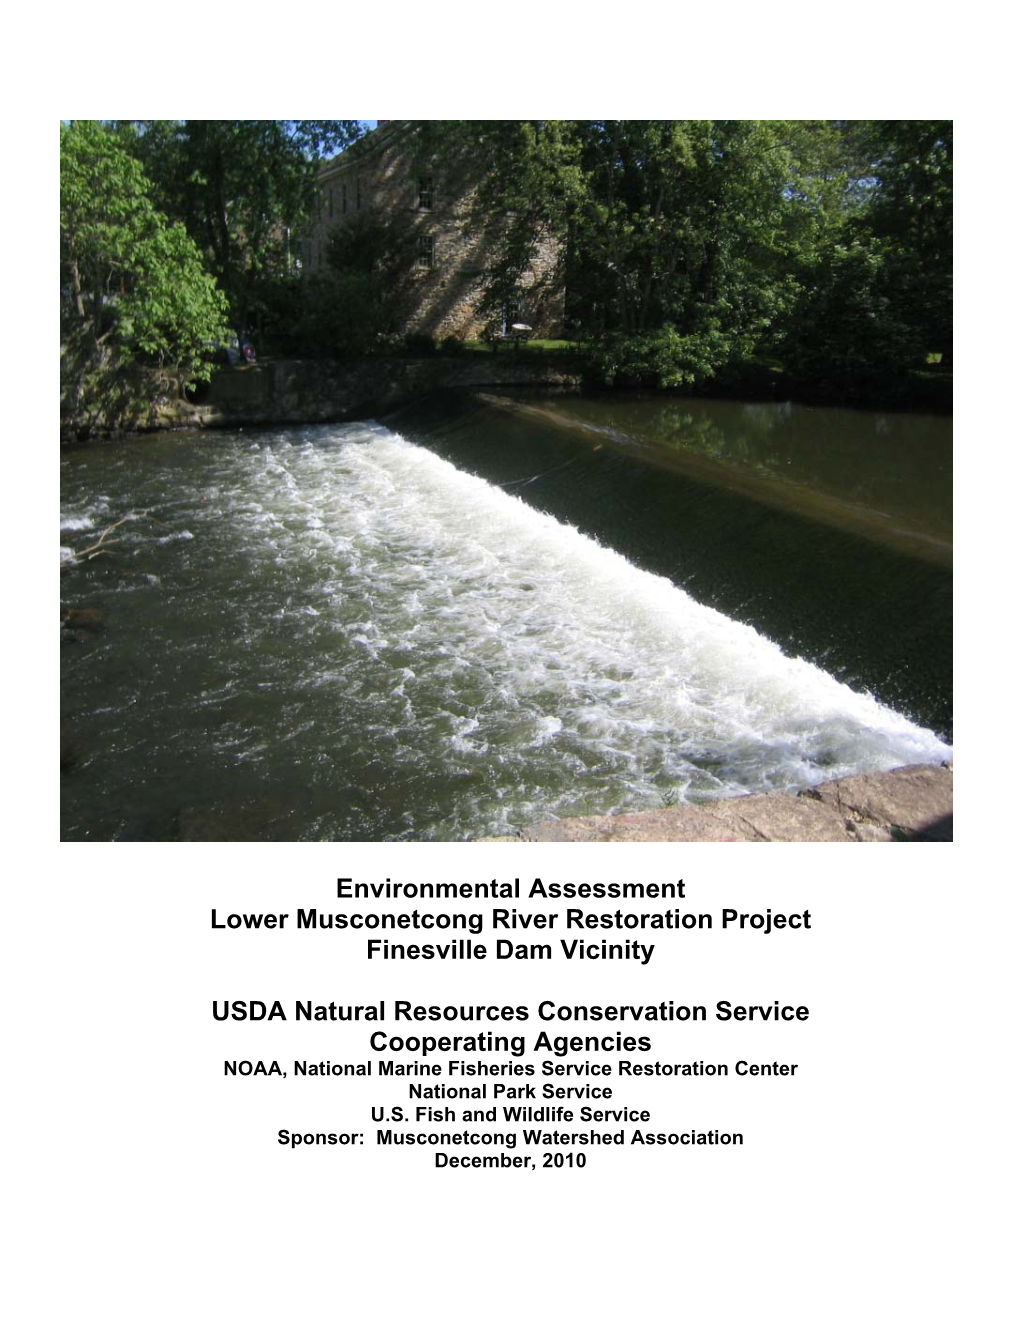 Environmental Assessment Lower Musconetcong River Restoration Project Finesville Dam Vicinity